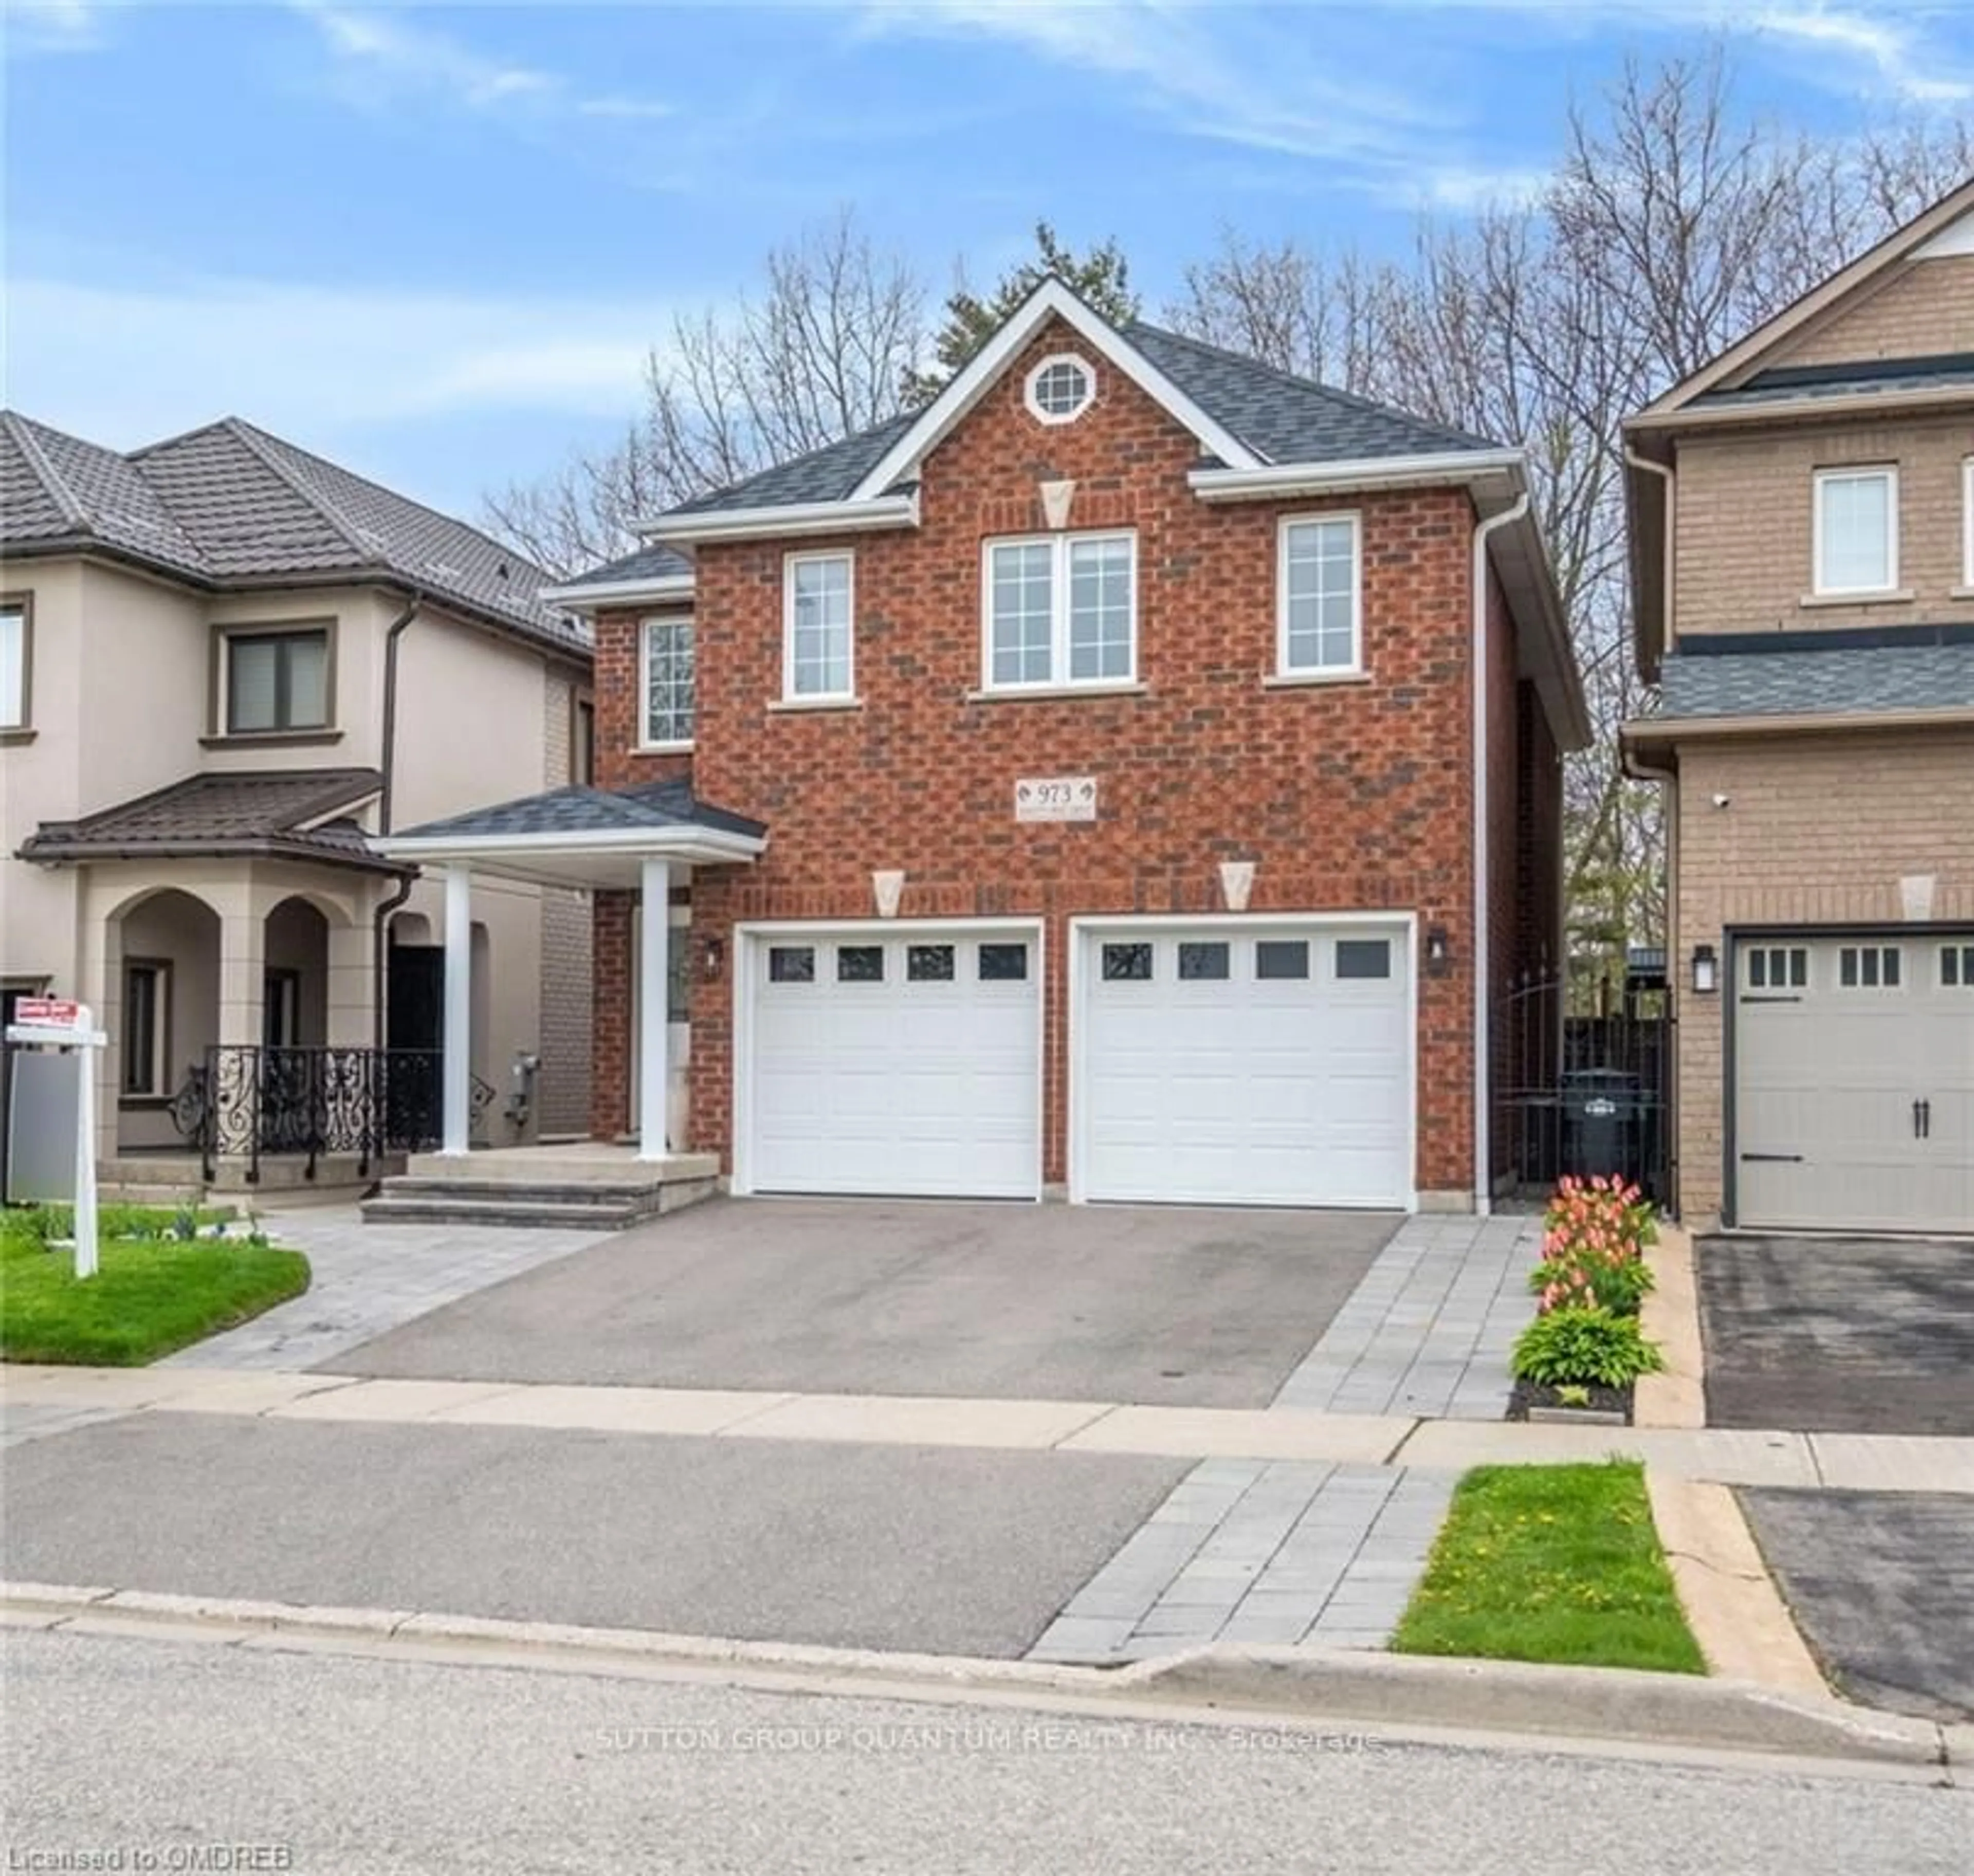 Home with brick exterior material for 973 Knotty Pine Grve, Mississauga Ontario L5W 1J9